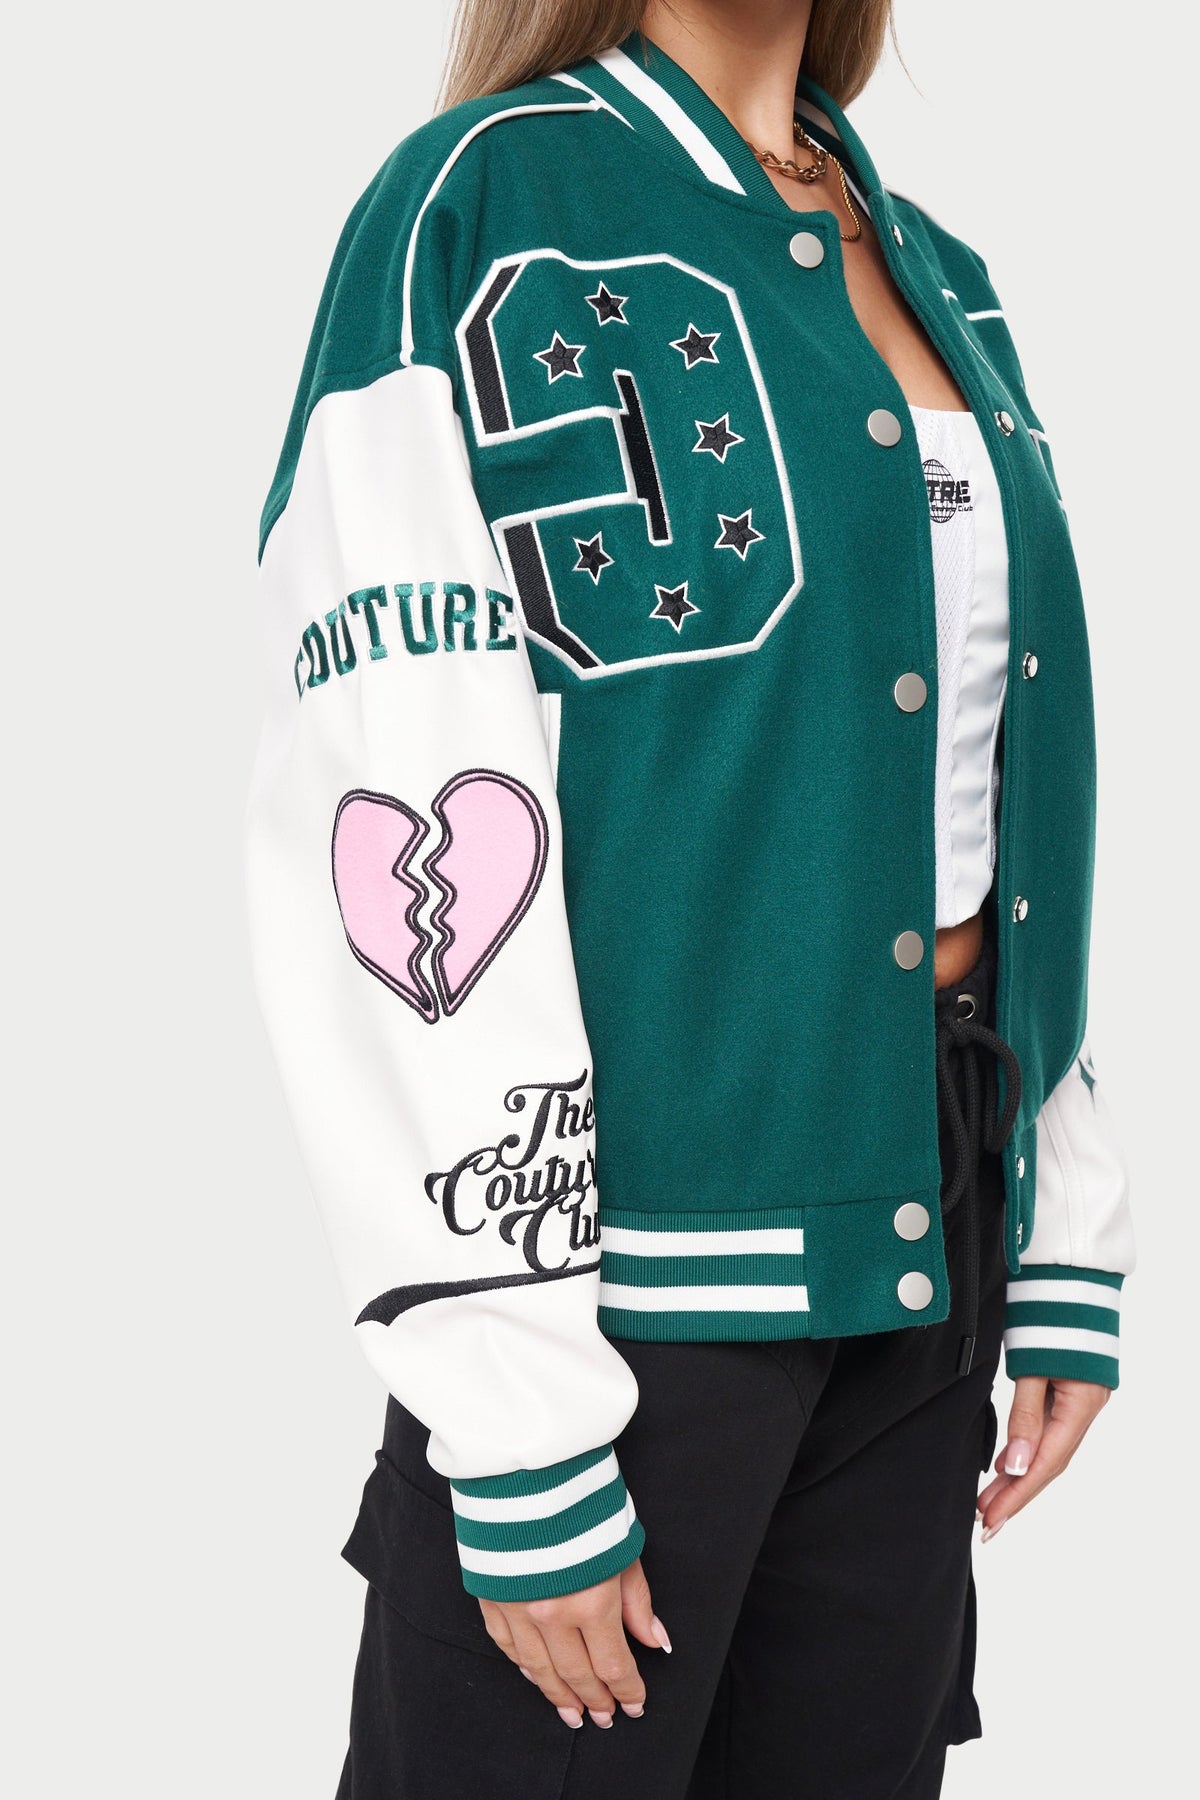 Men's Green Varsity Jacket | The Couture Club - S